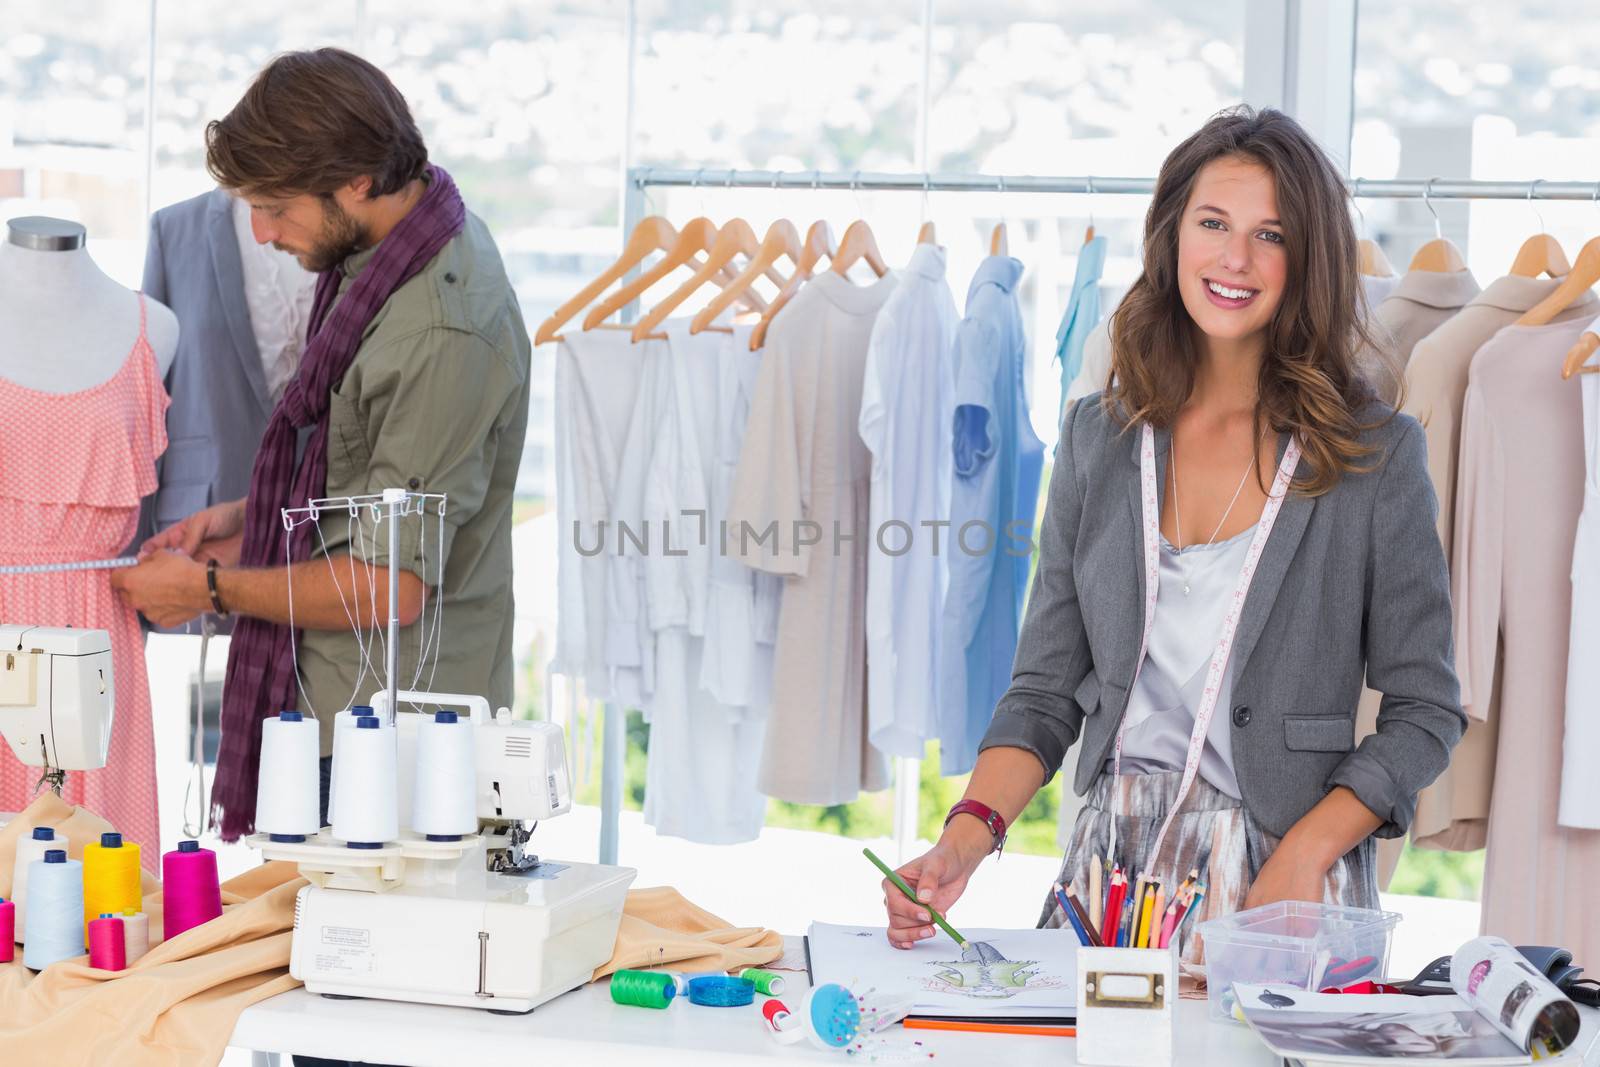 Young fashion designers working in a bright office